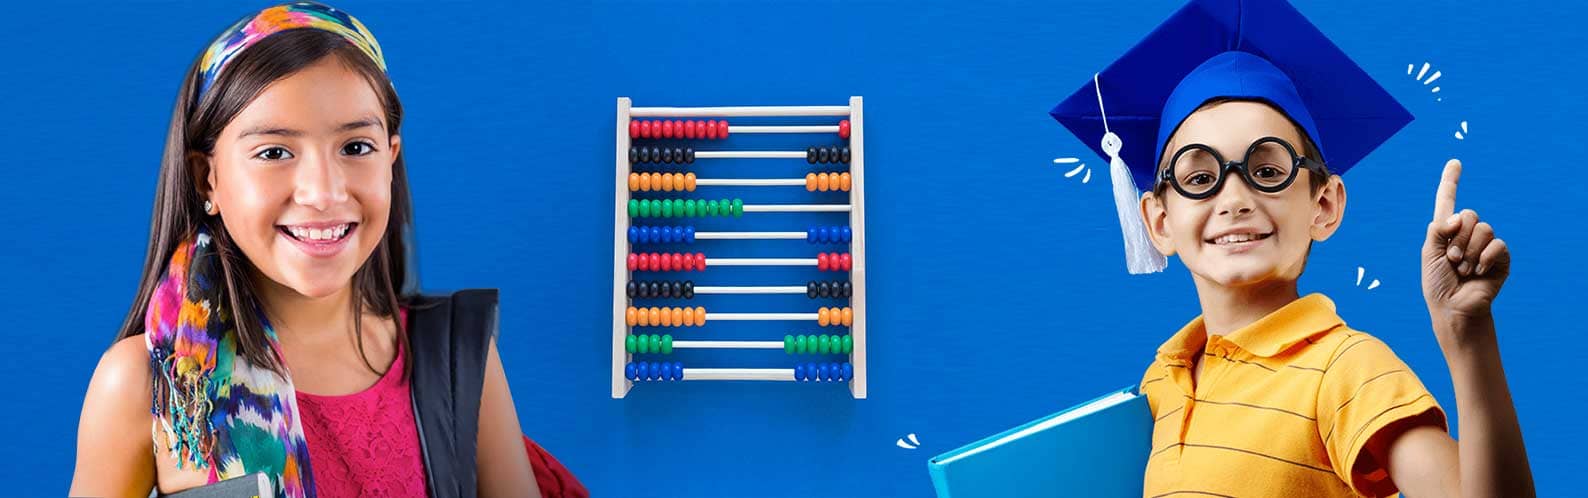 abacus banner where kids learning and showcasing abacus skills and materials